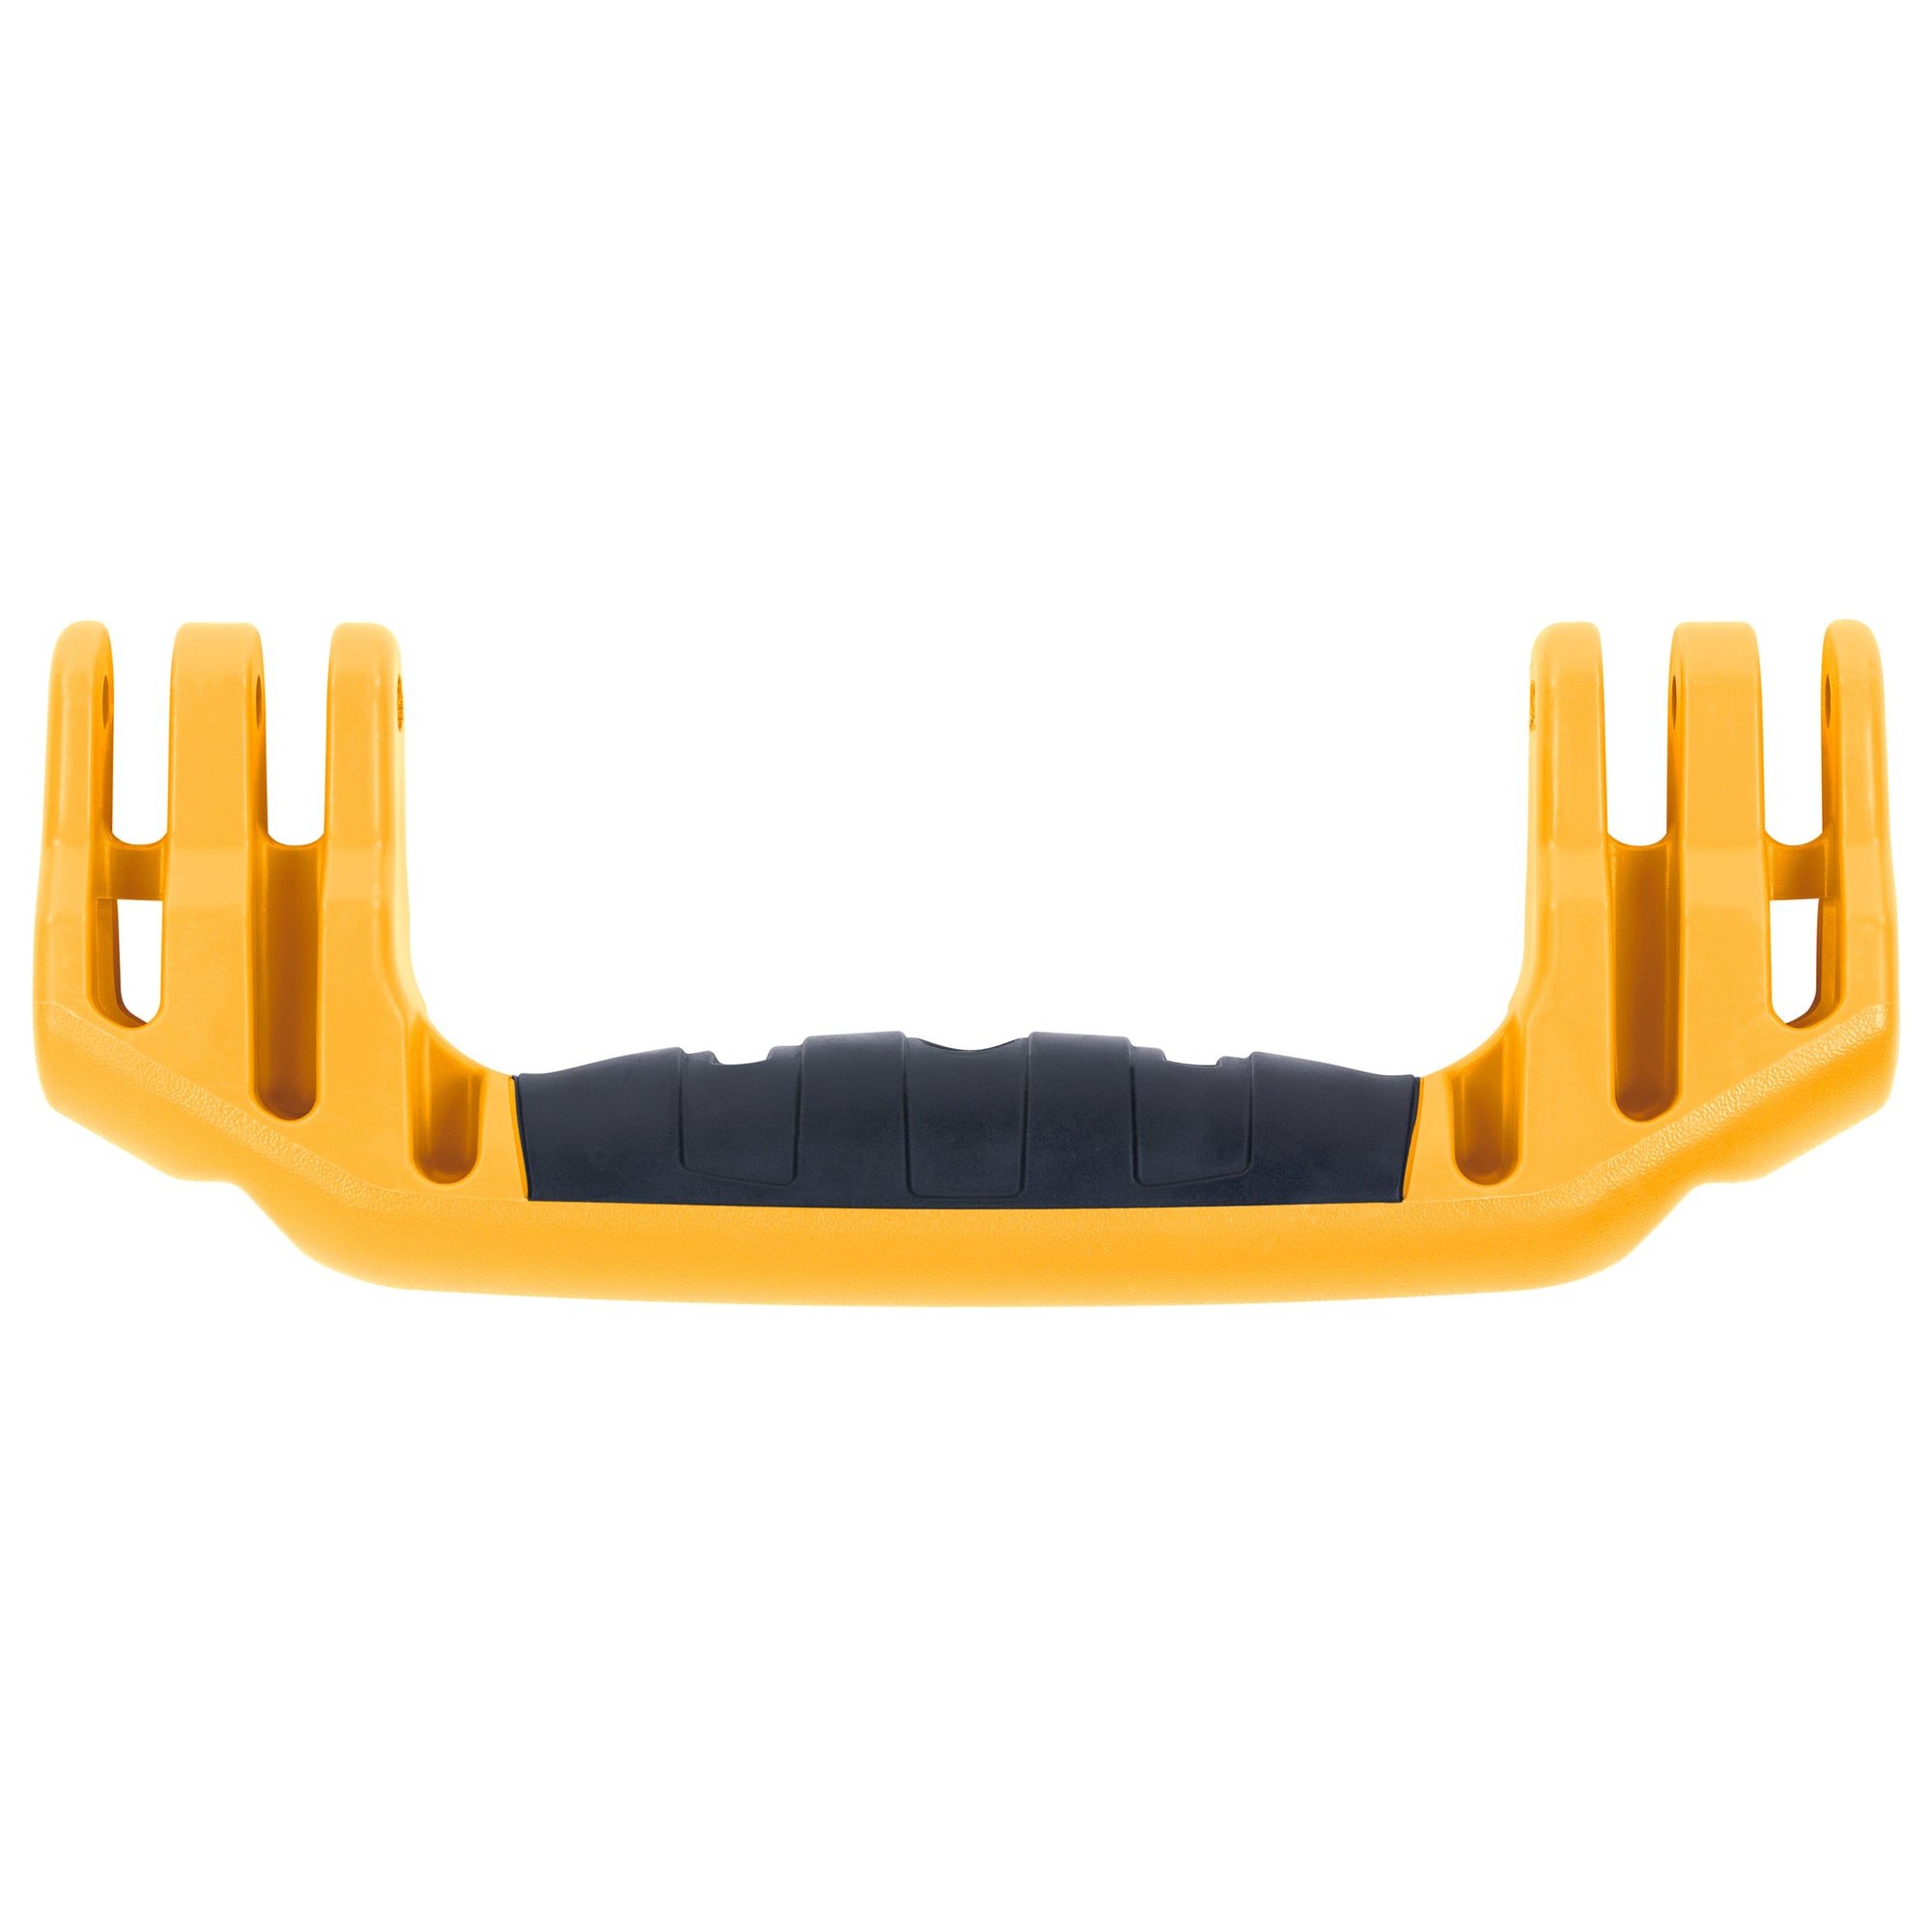 Pelican Rubber Overmolded Replacement Handle, Medium, Yellow (3-Prong) ColorCase 